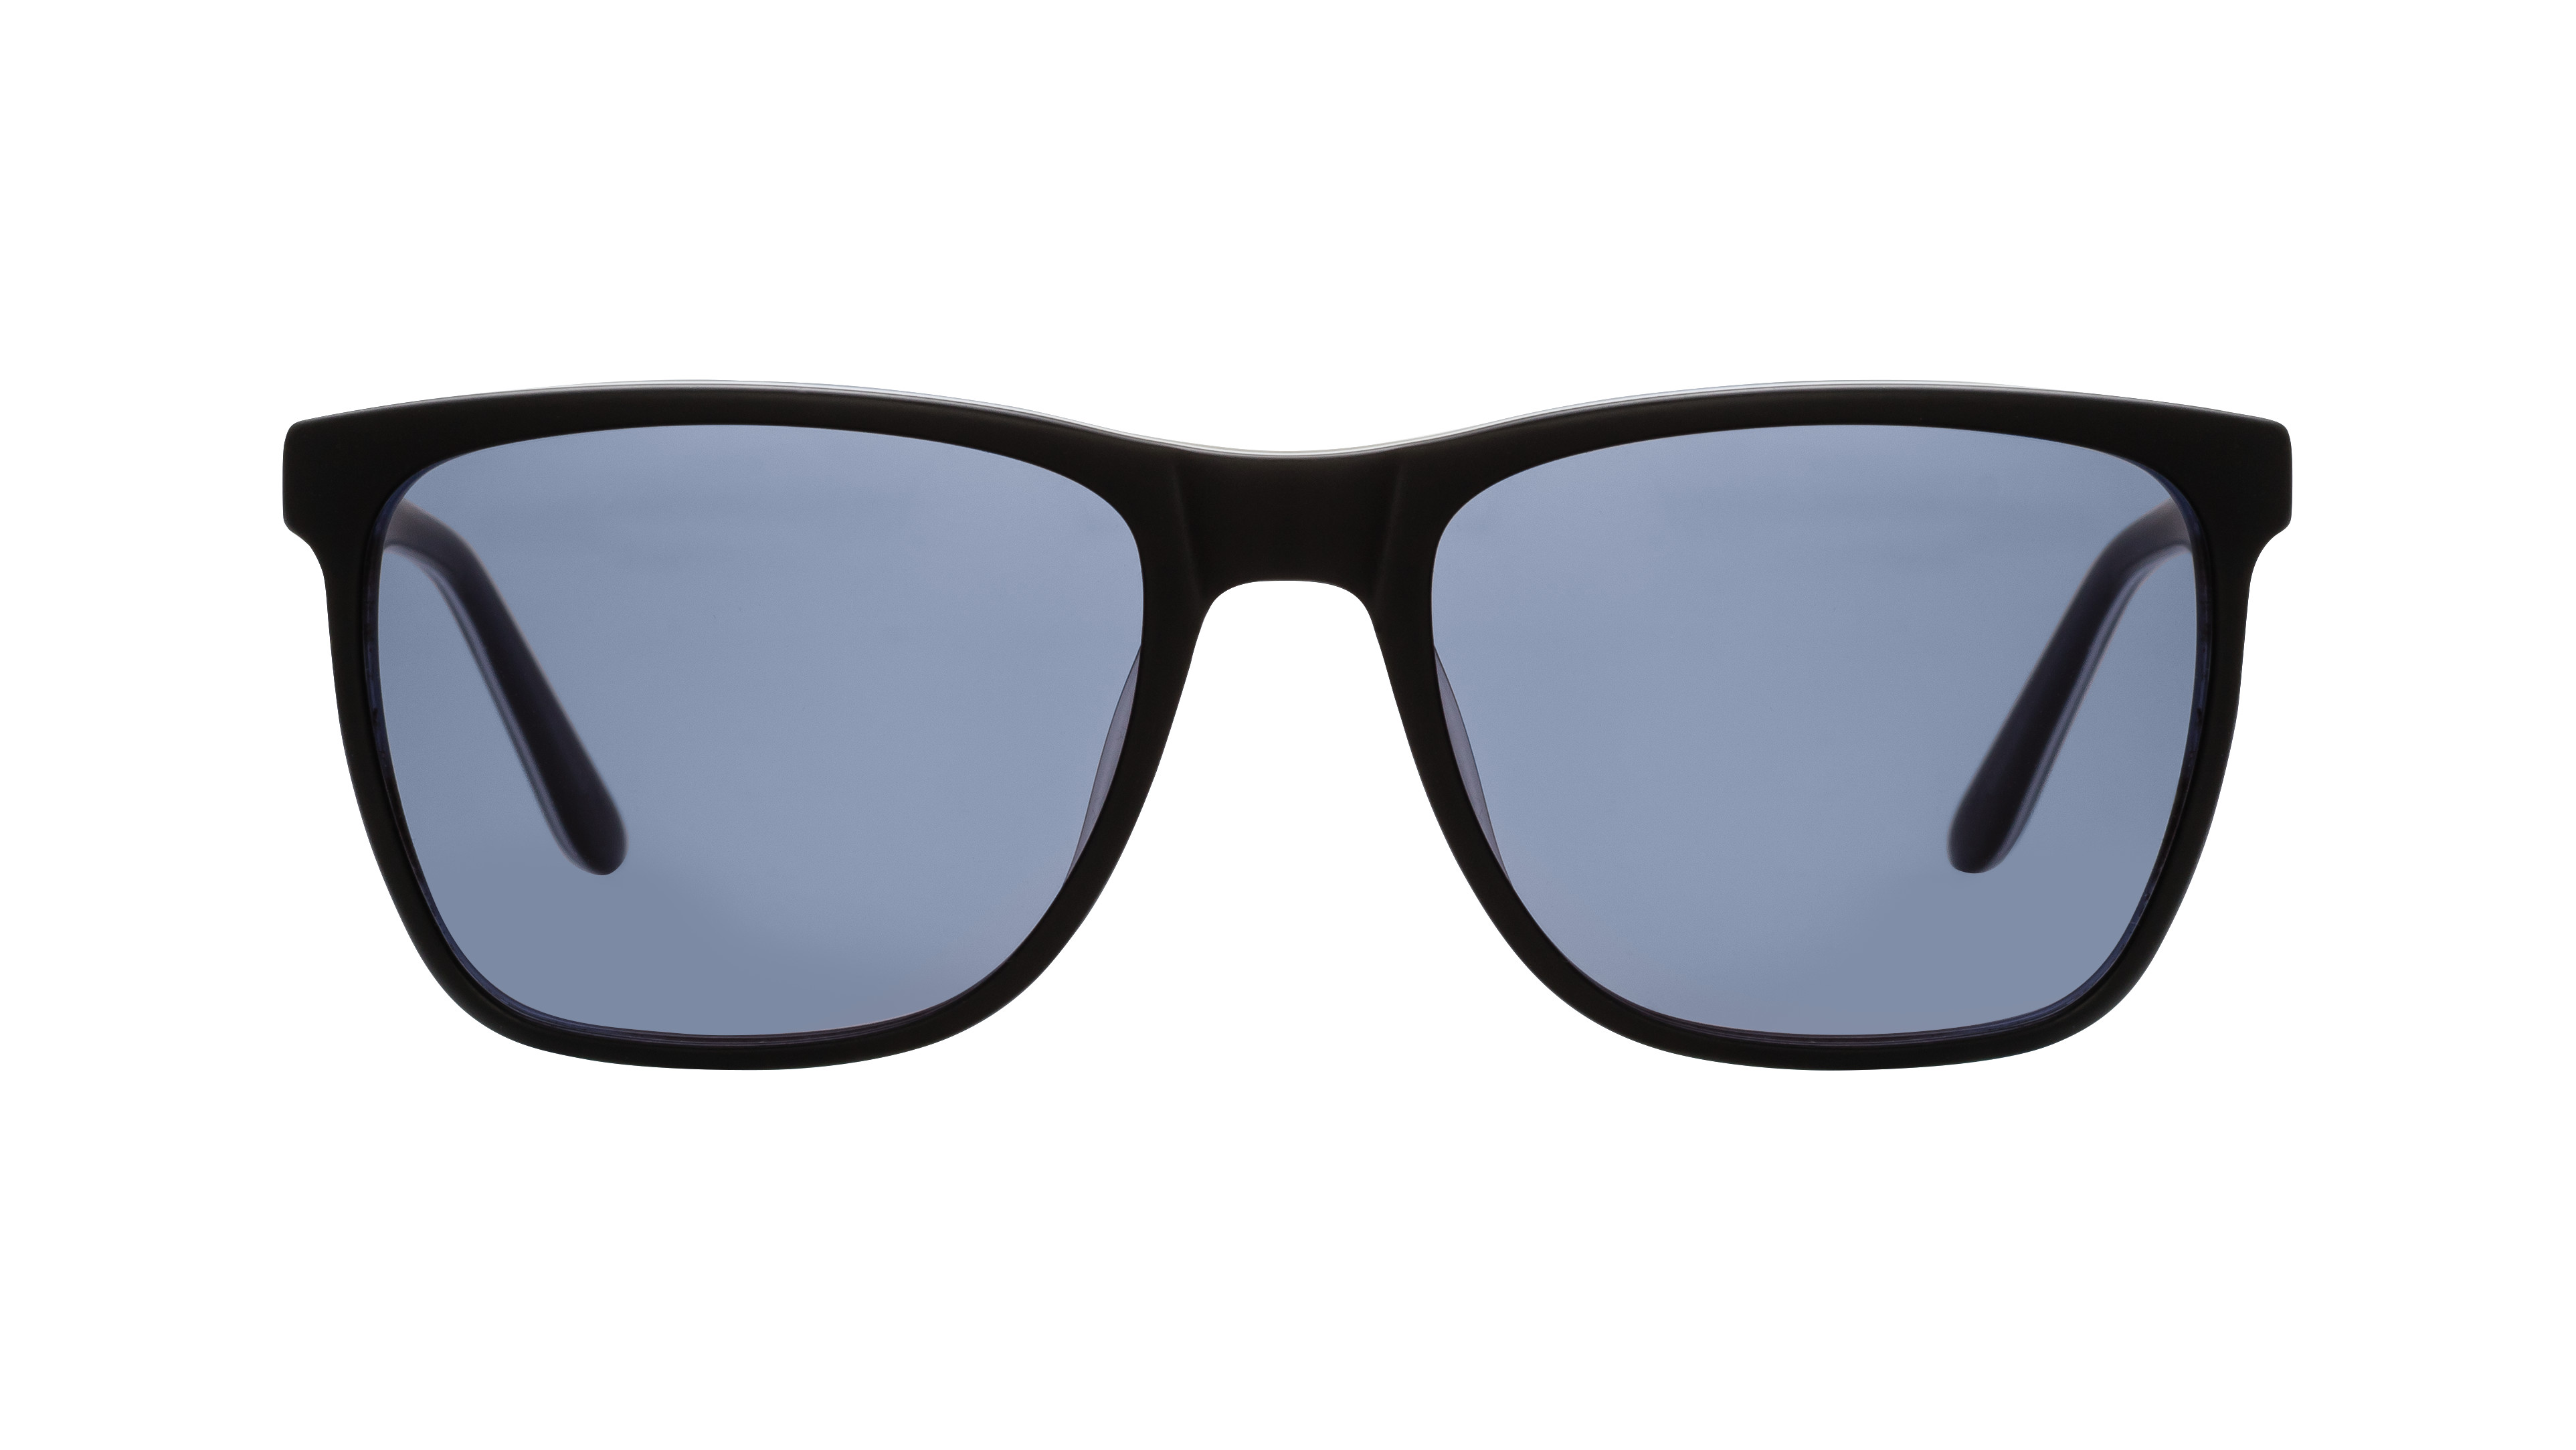 [products.image.front] HUMPHREY´S eyewear 588089 17 Sonnenbrille